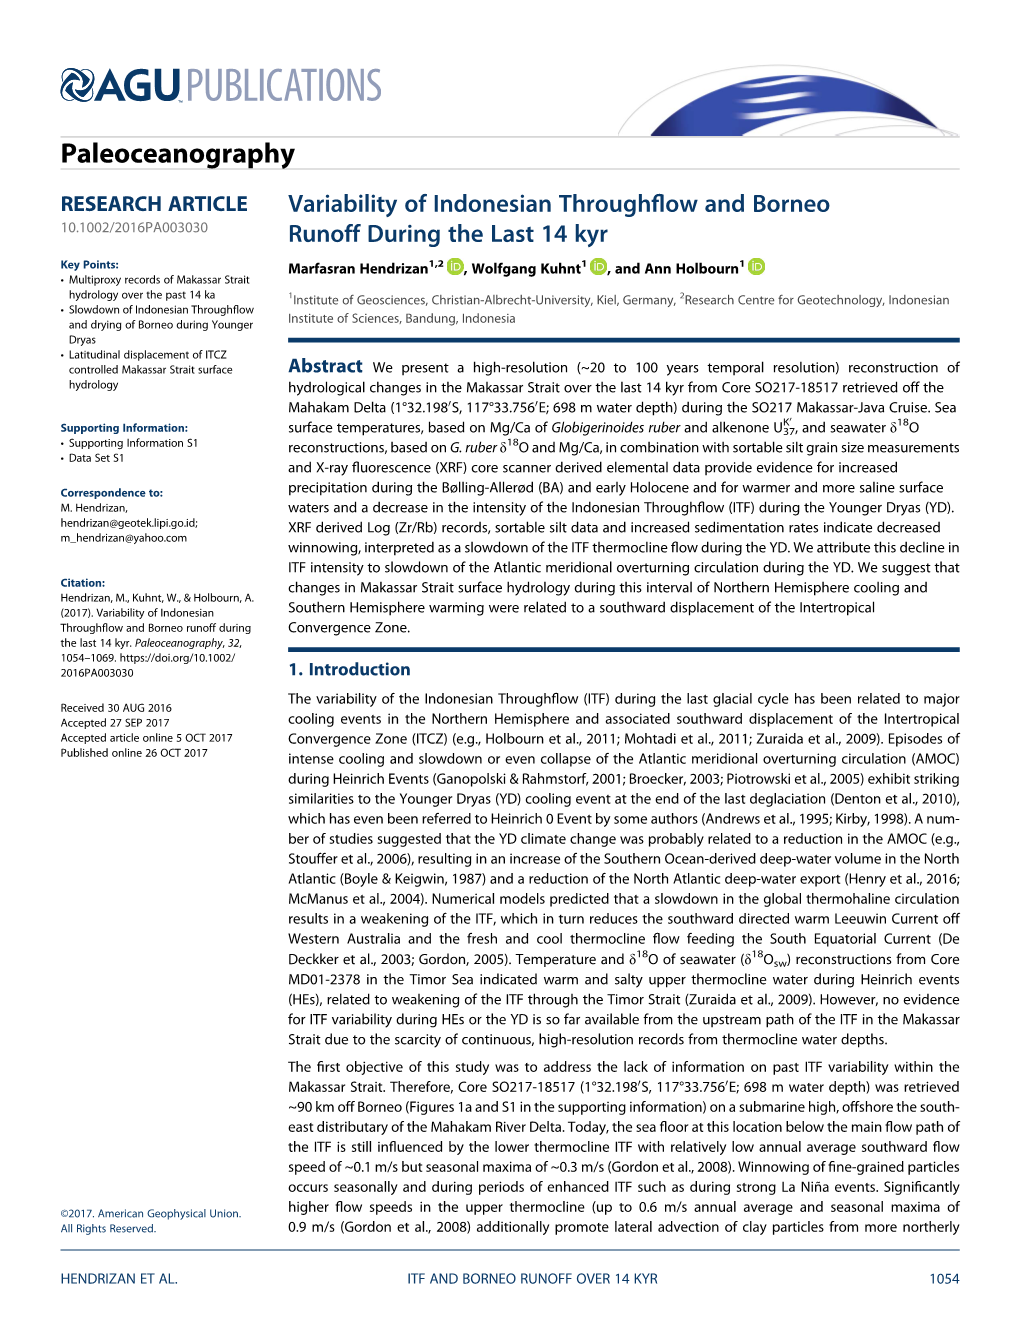 Variability of Indonesian Throughflow and Borneo Runoff During the Last